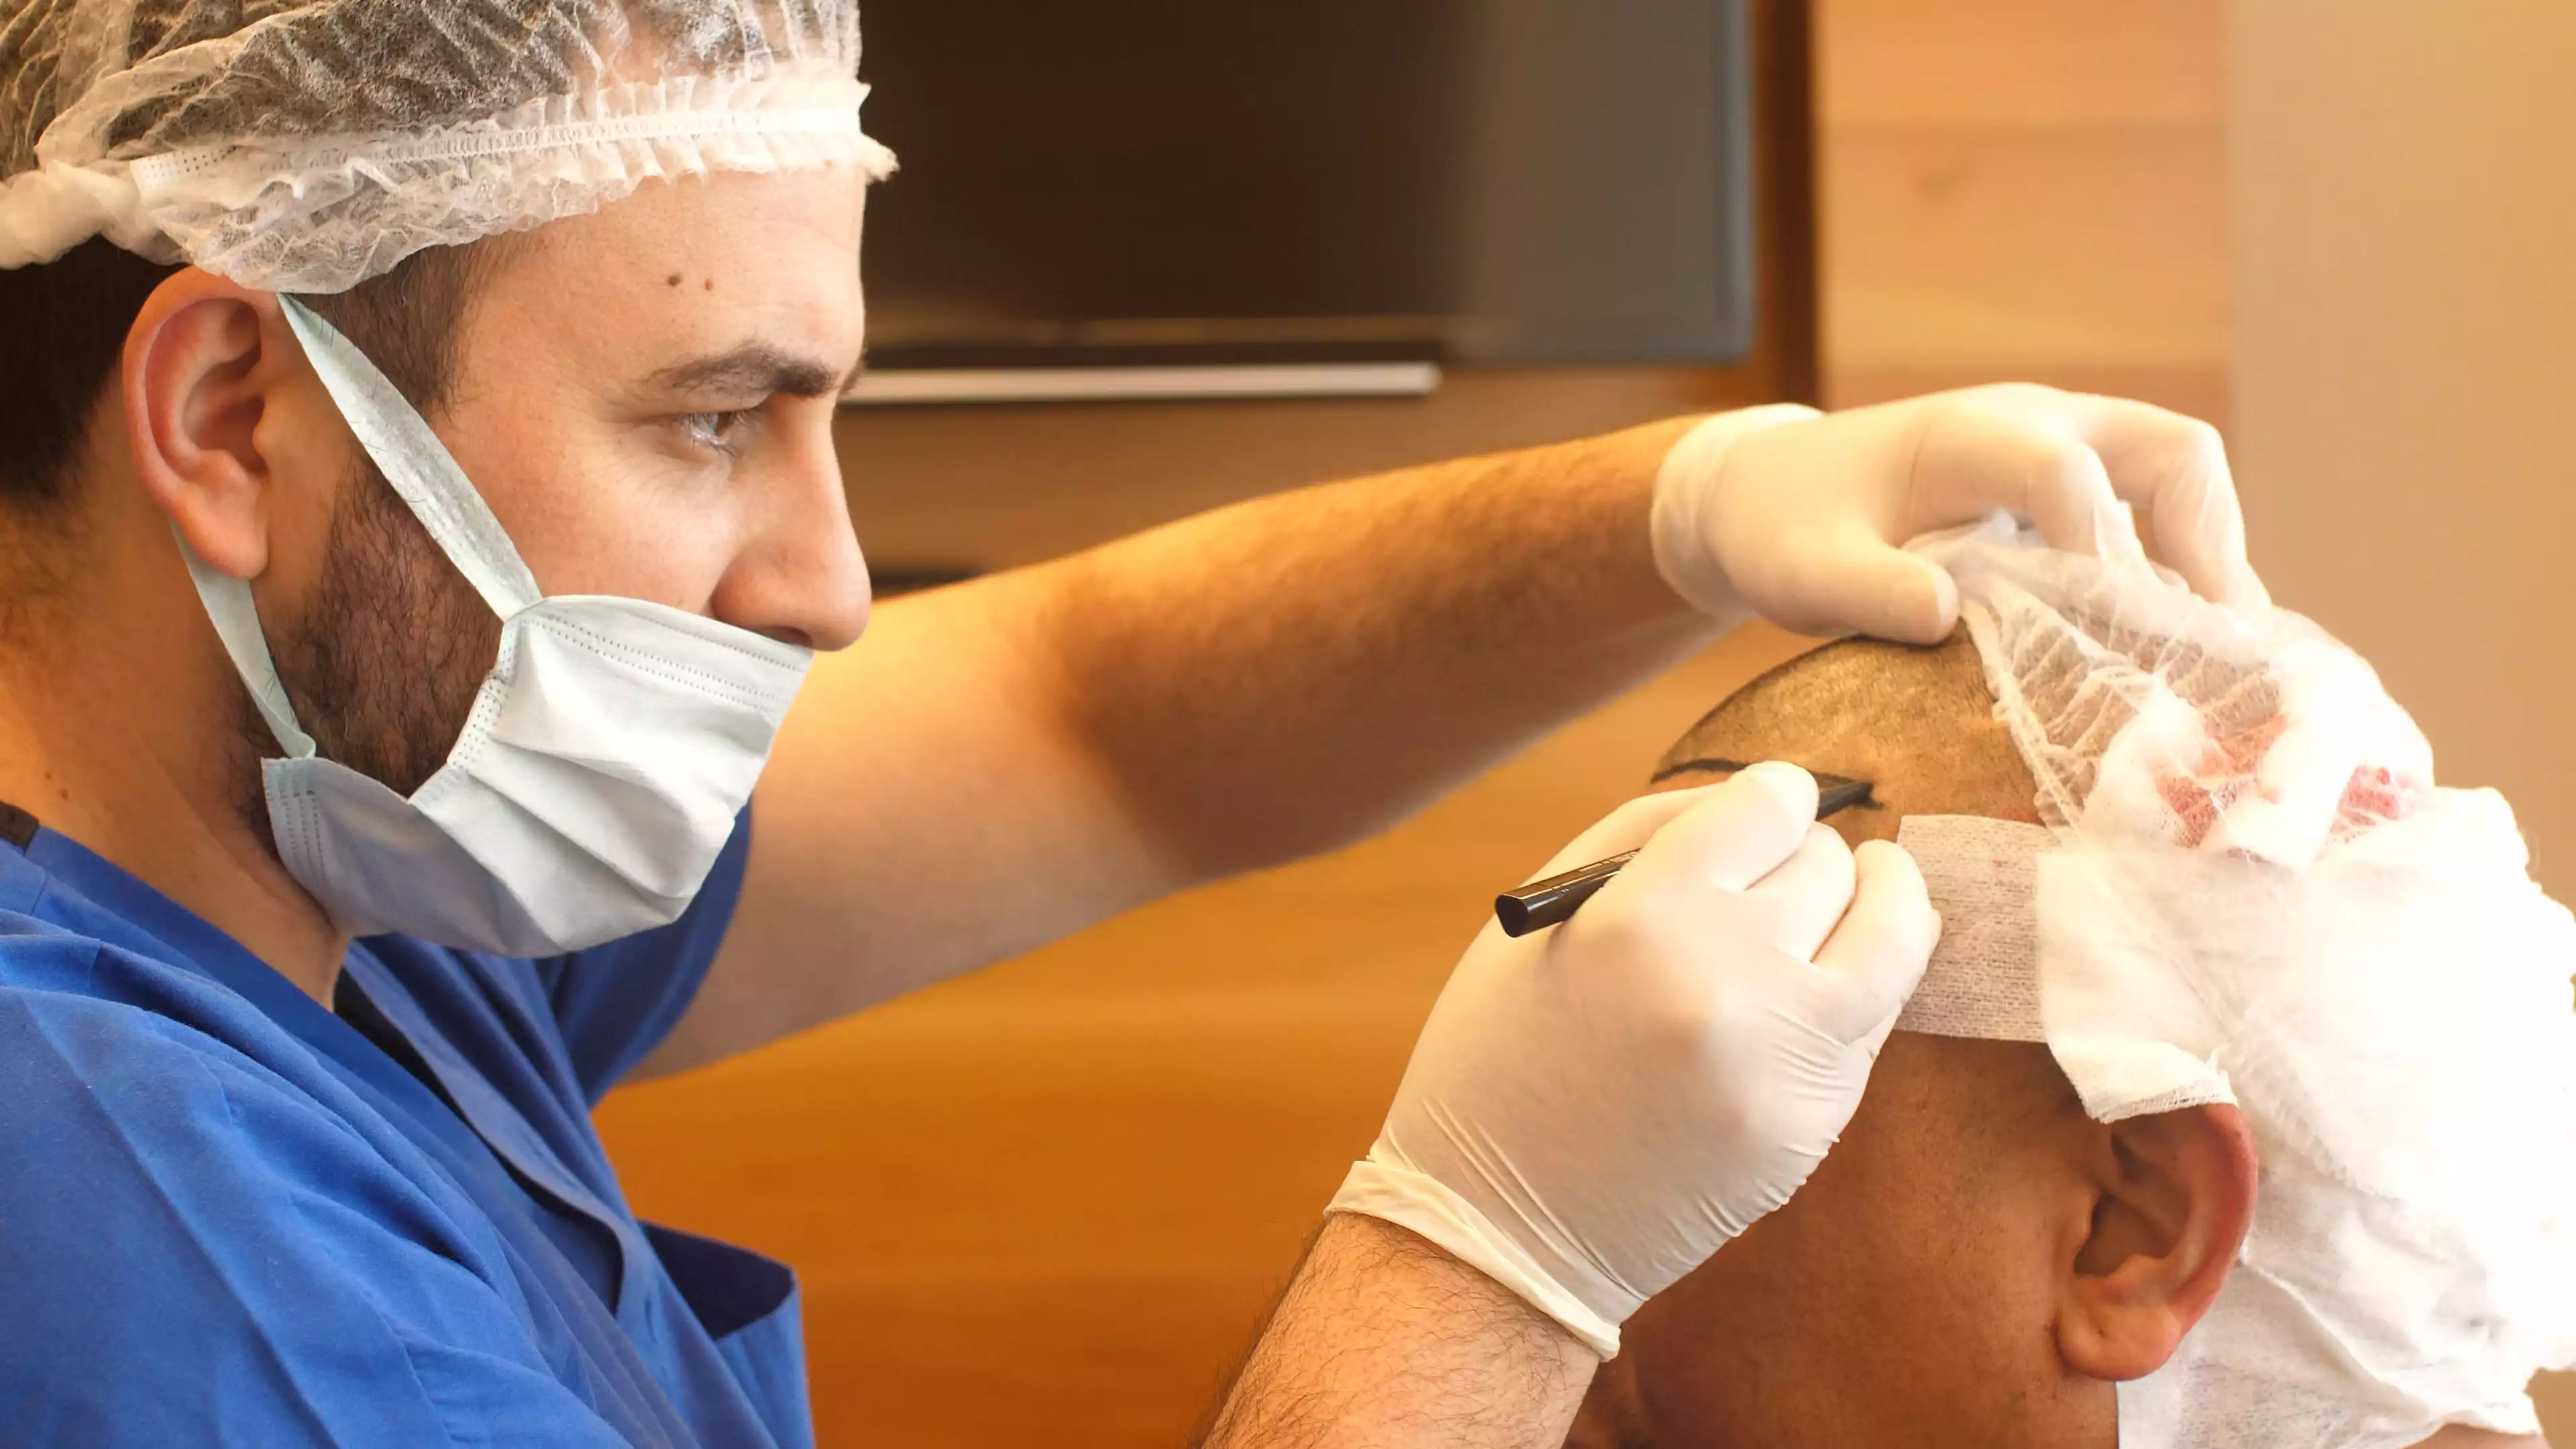 Will There Be Pain After Hair Transplant?